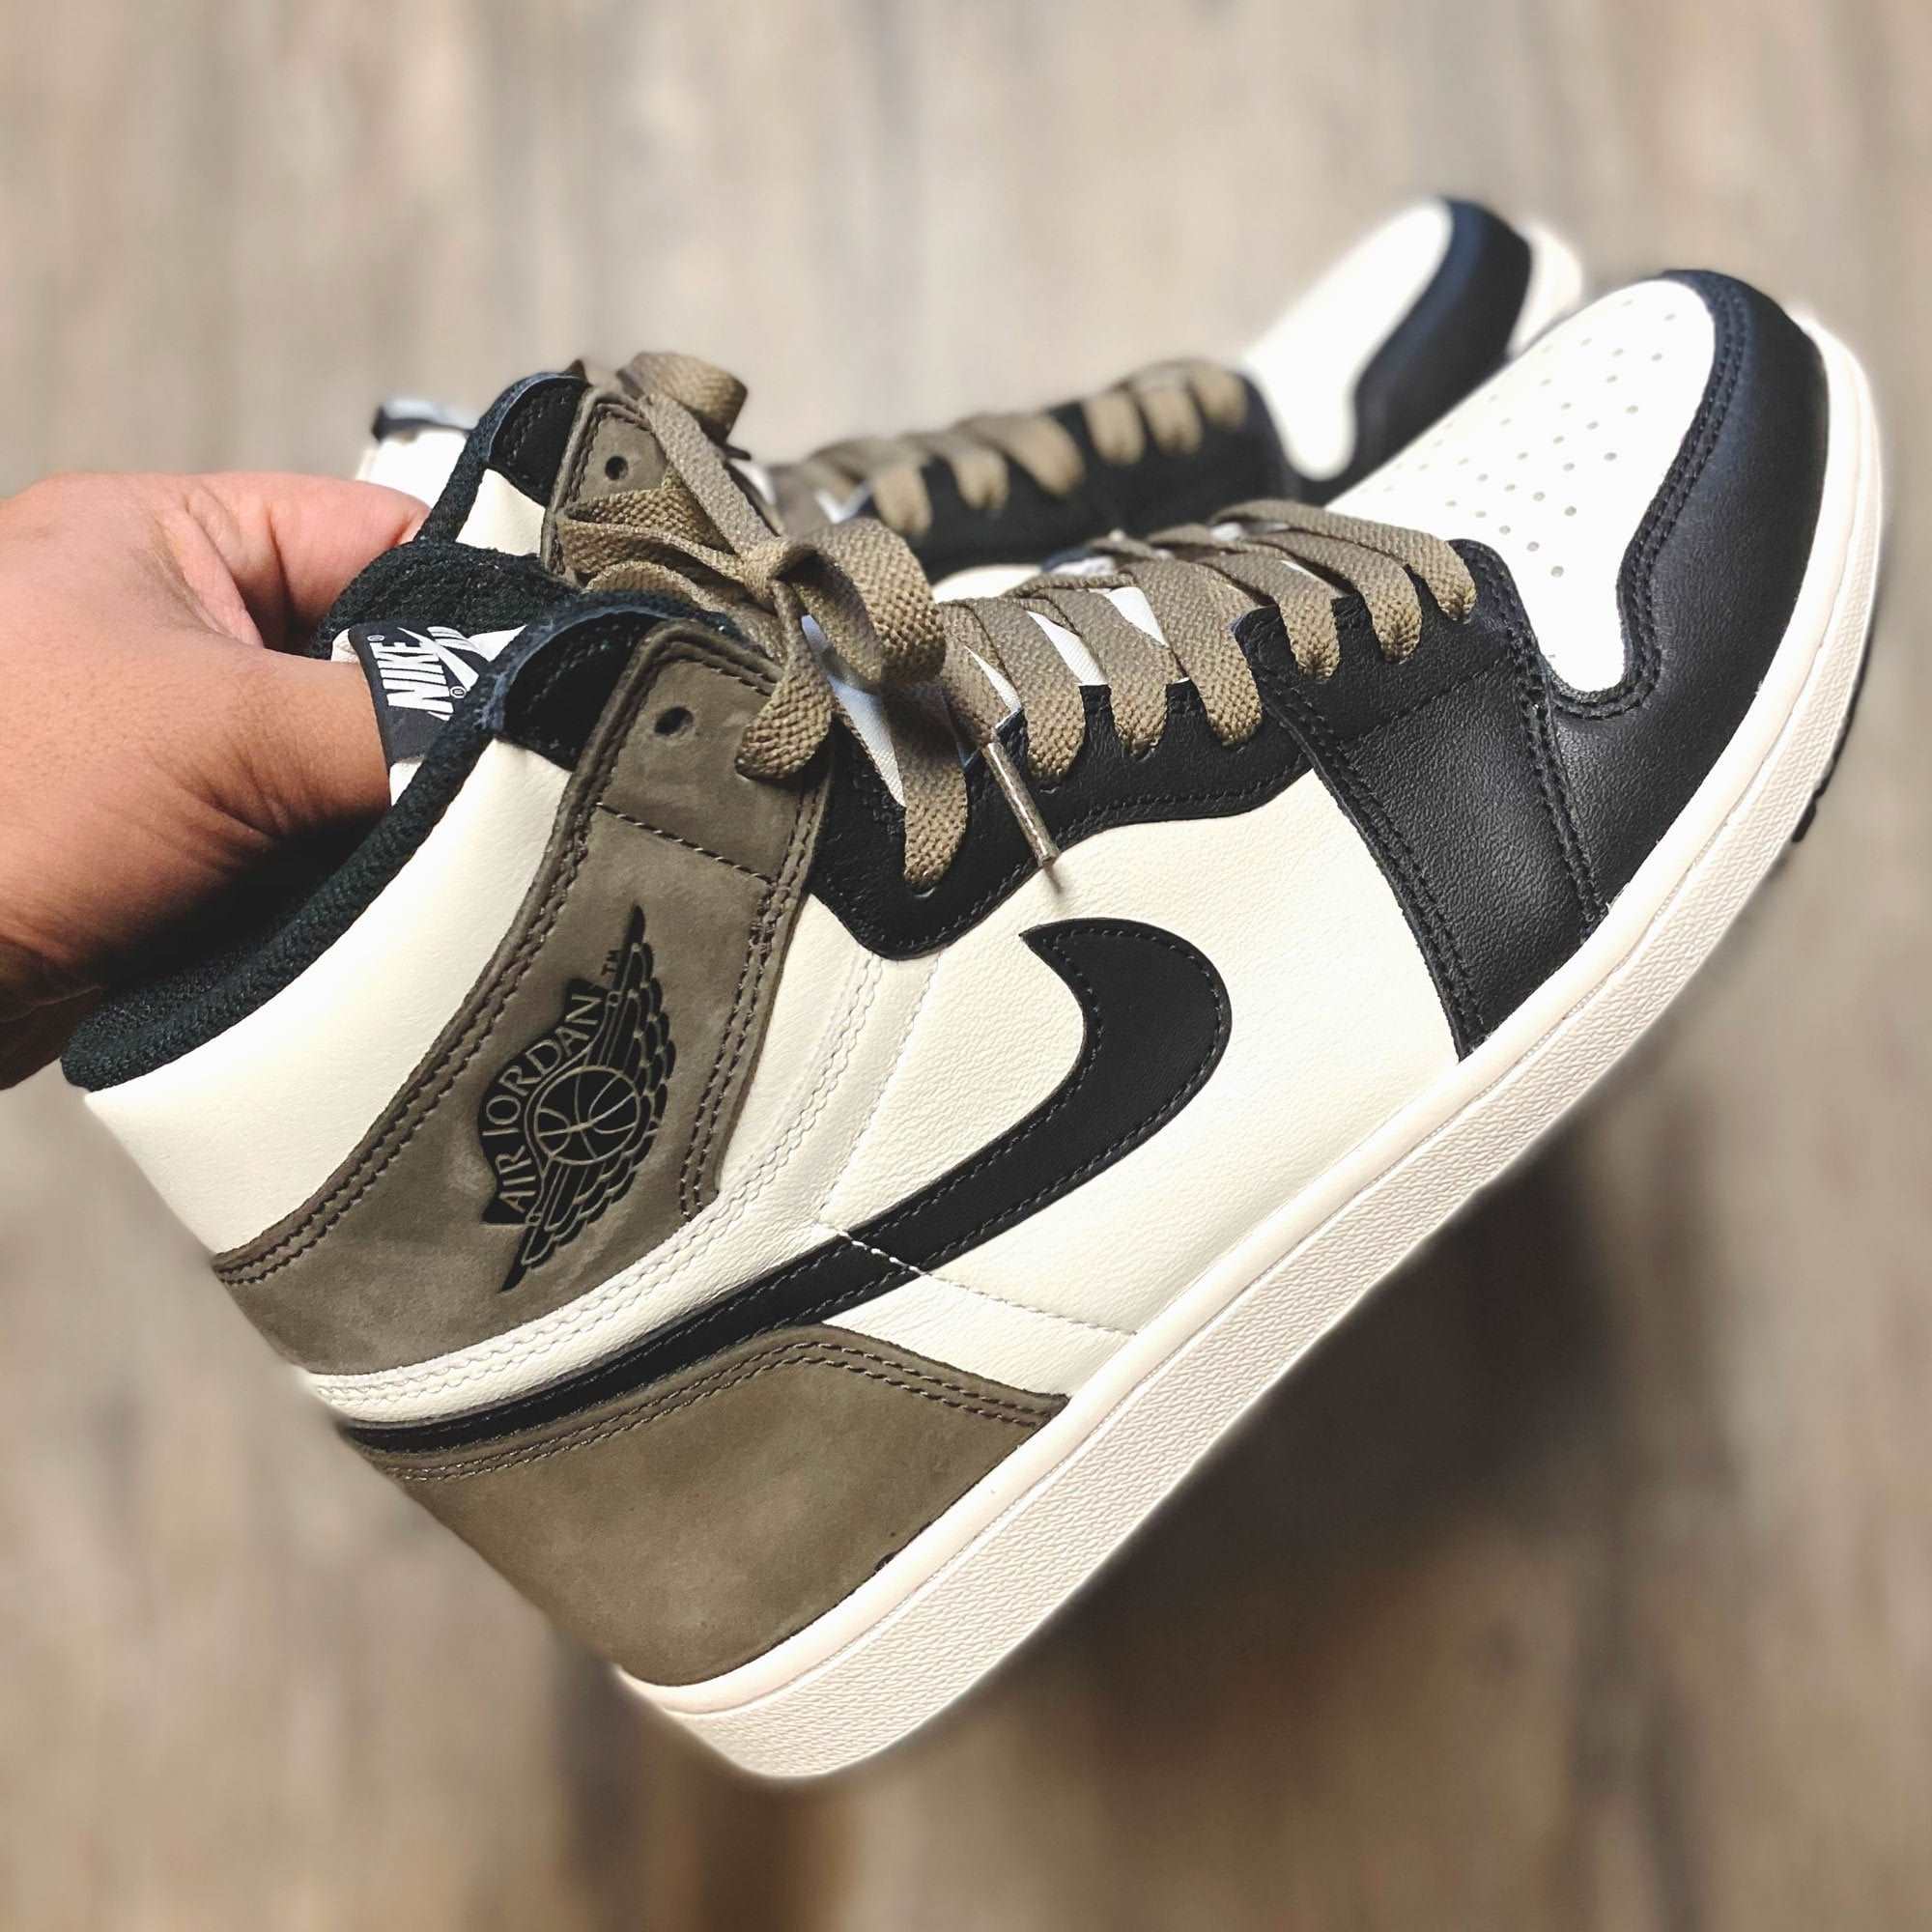 how long are the laces on jordan 1